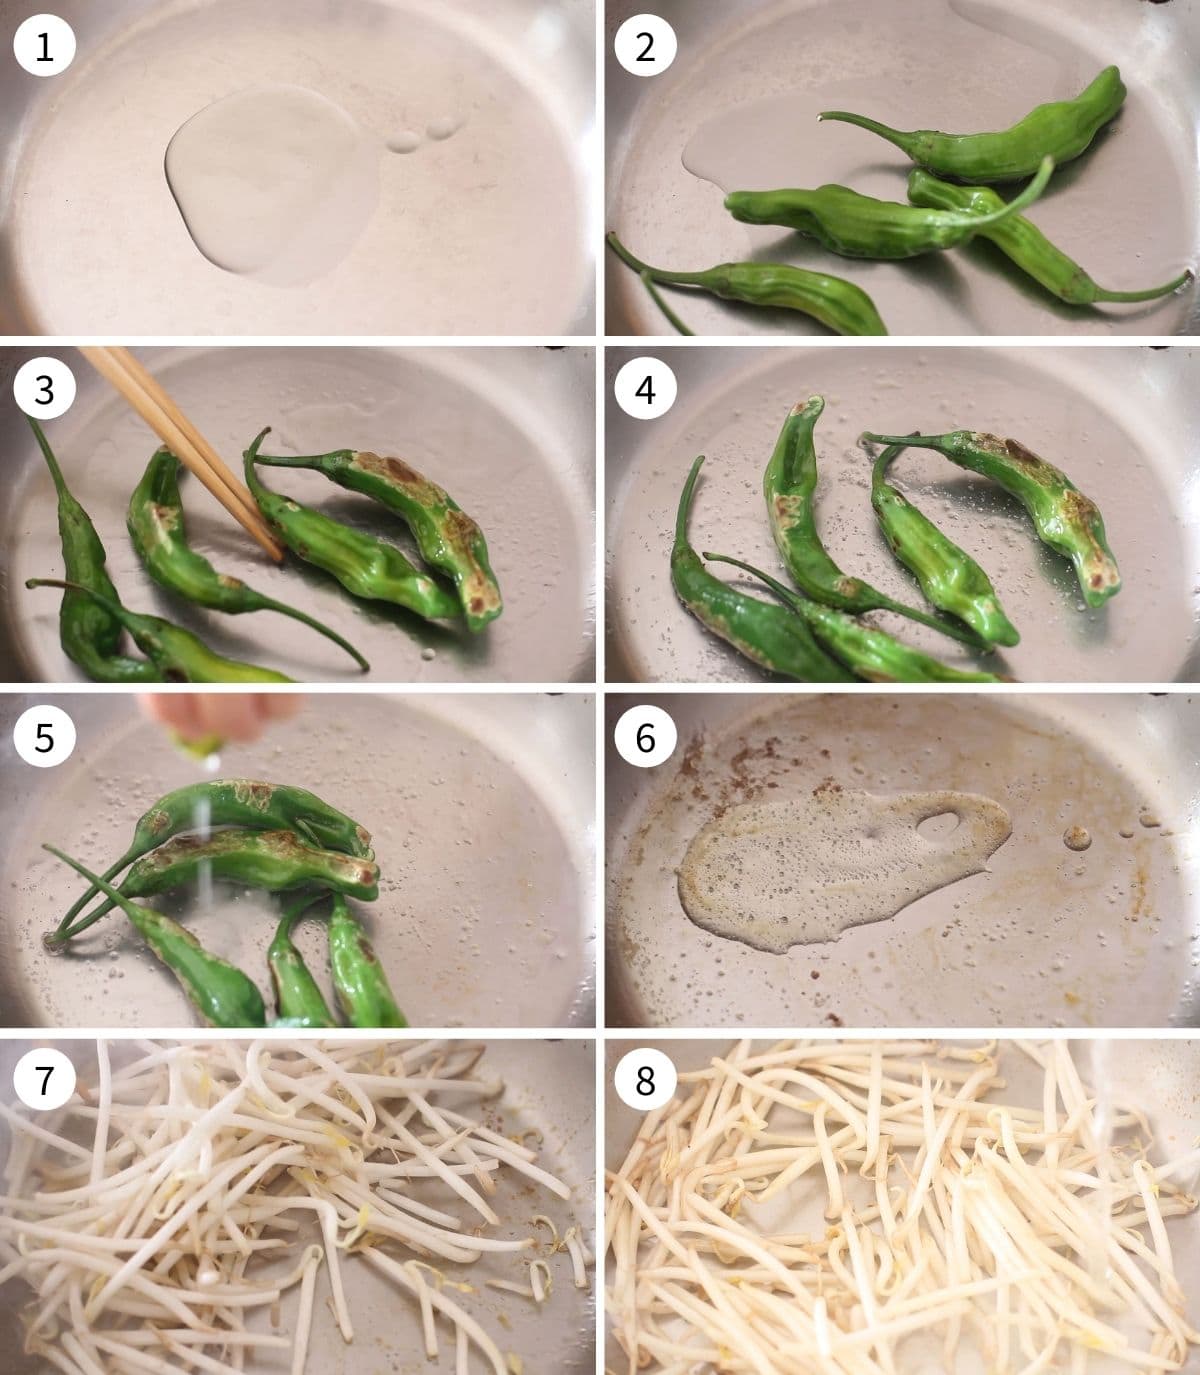 Step by step photos on how to char shishito peppers and stir fry bean sprouts in a saute pan.